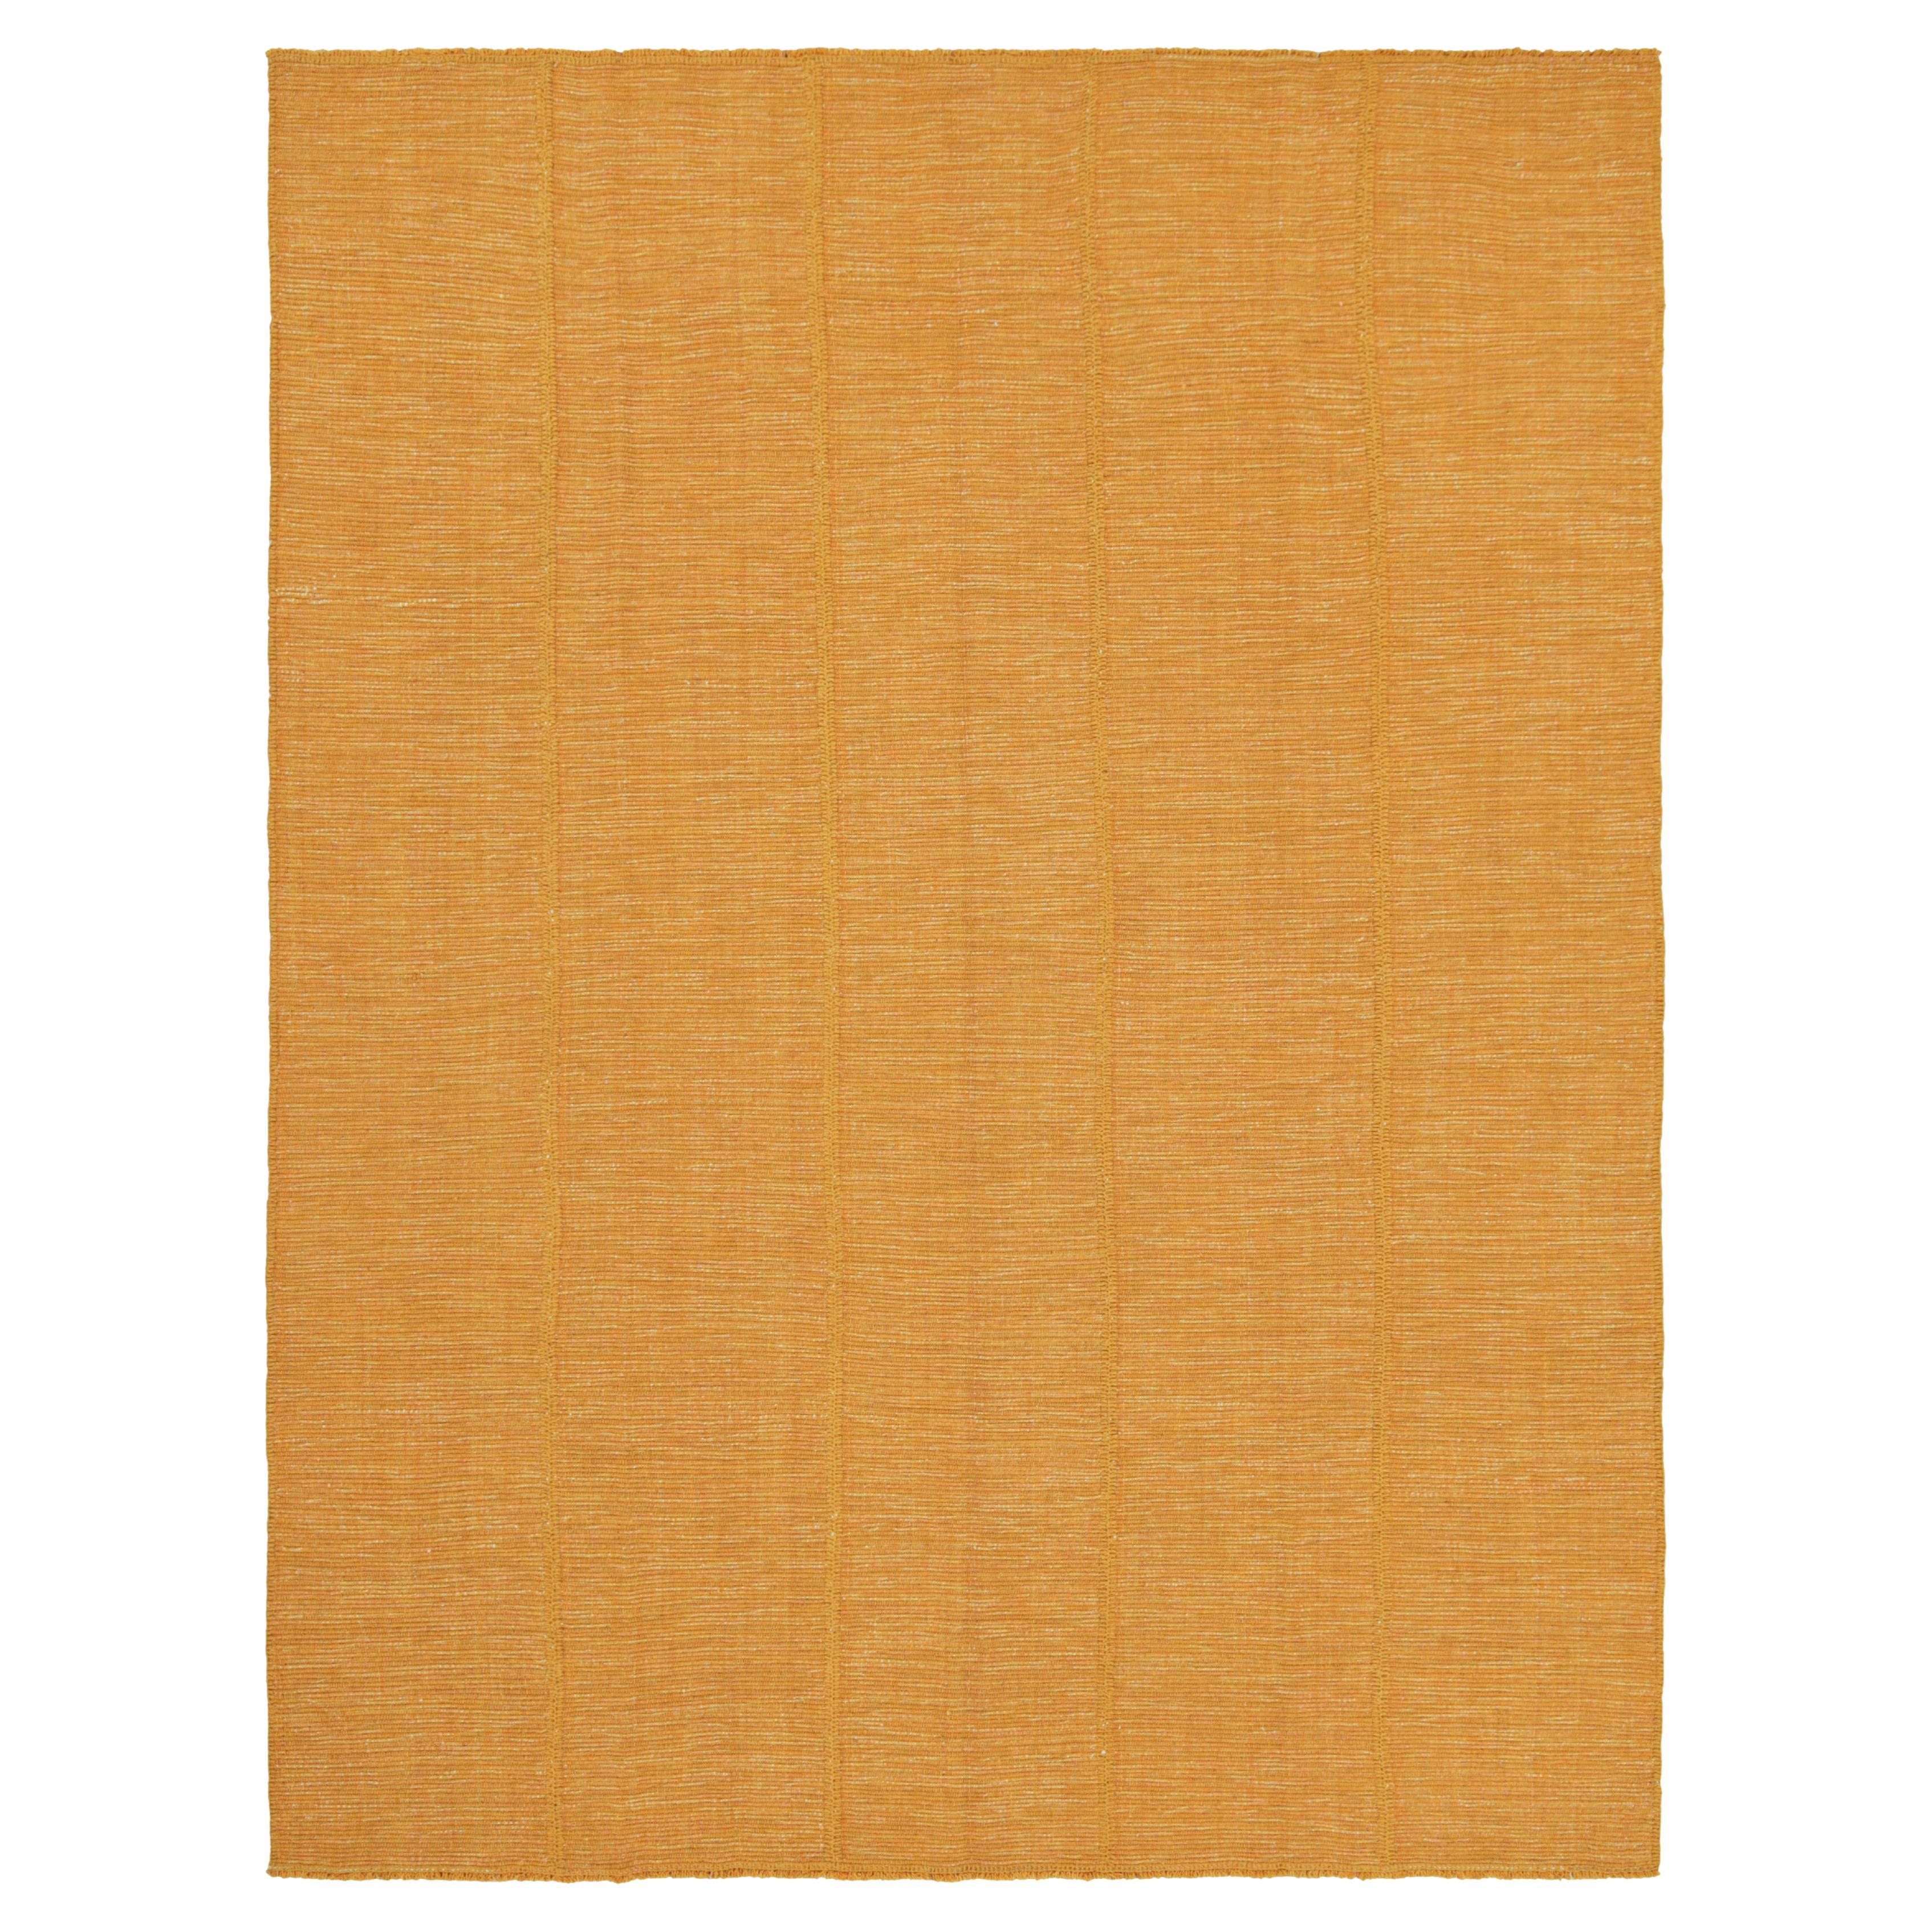 Rug & Kilim’s Contemporary Kilim in Ochre Gold Textural Stripes For Sale